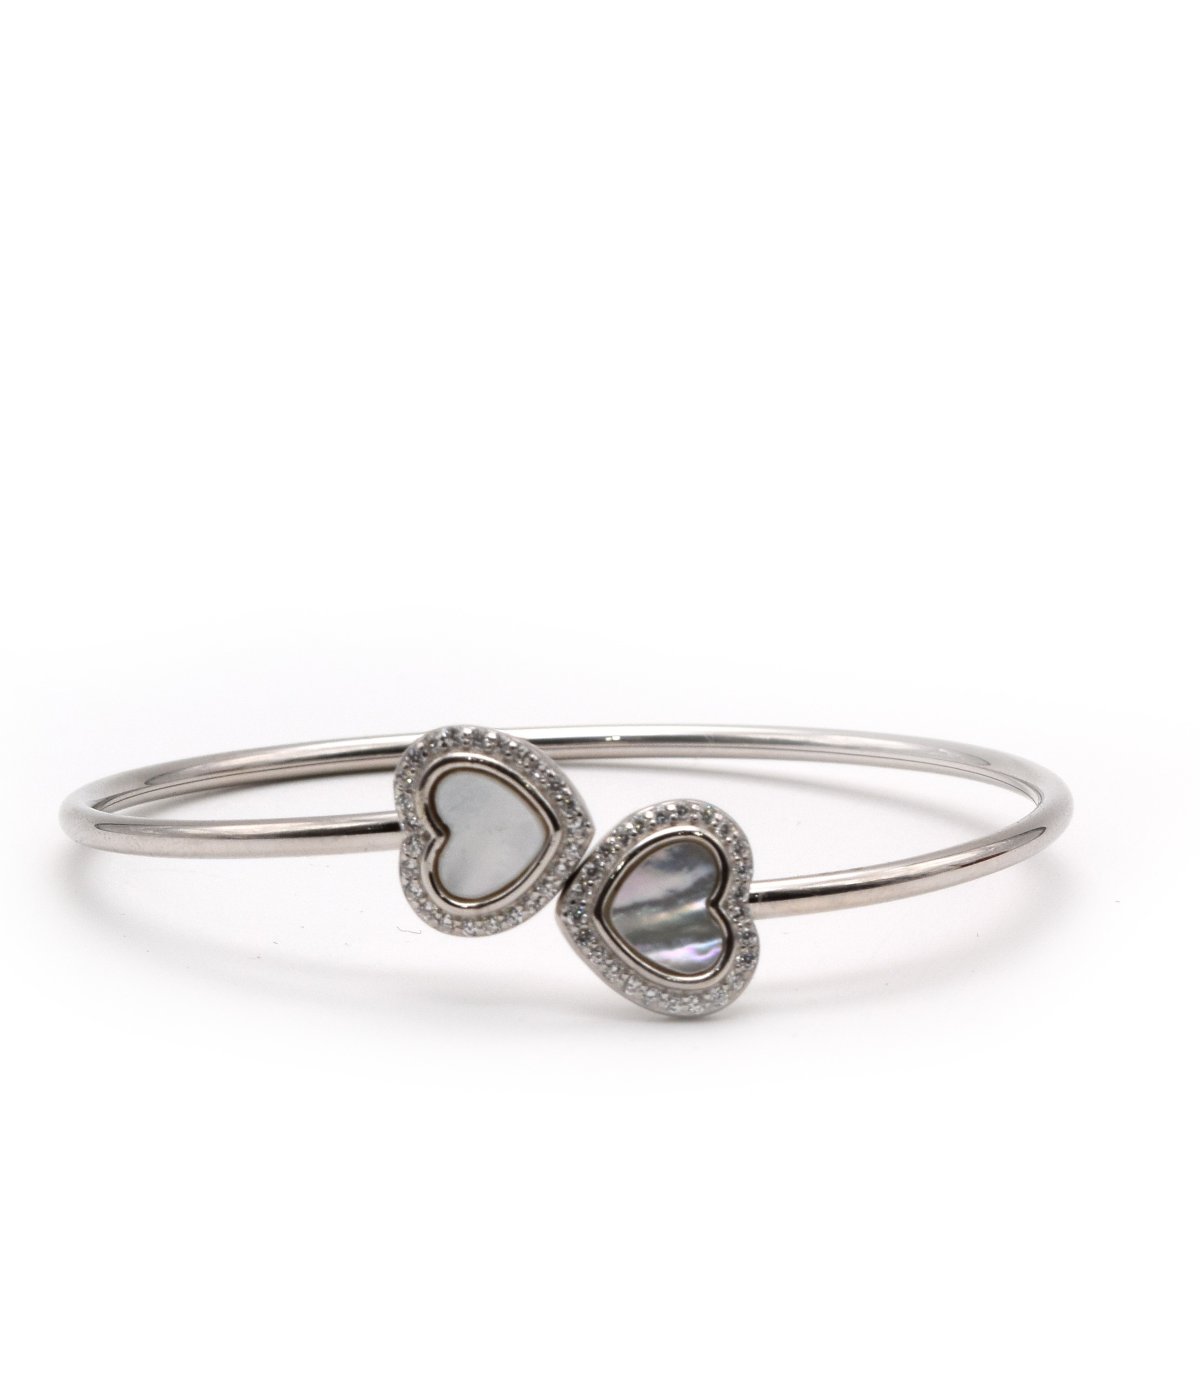 Deal of the Month: American Diamond Infinity Bracelet